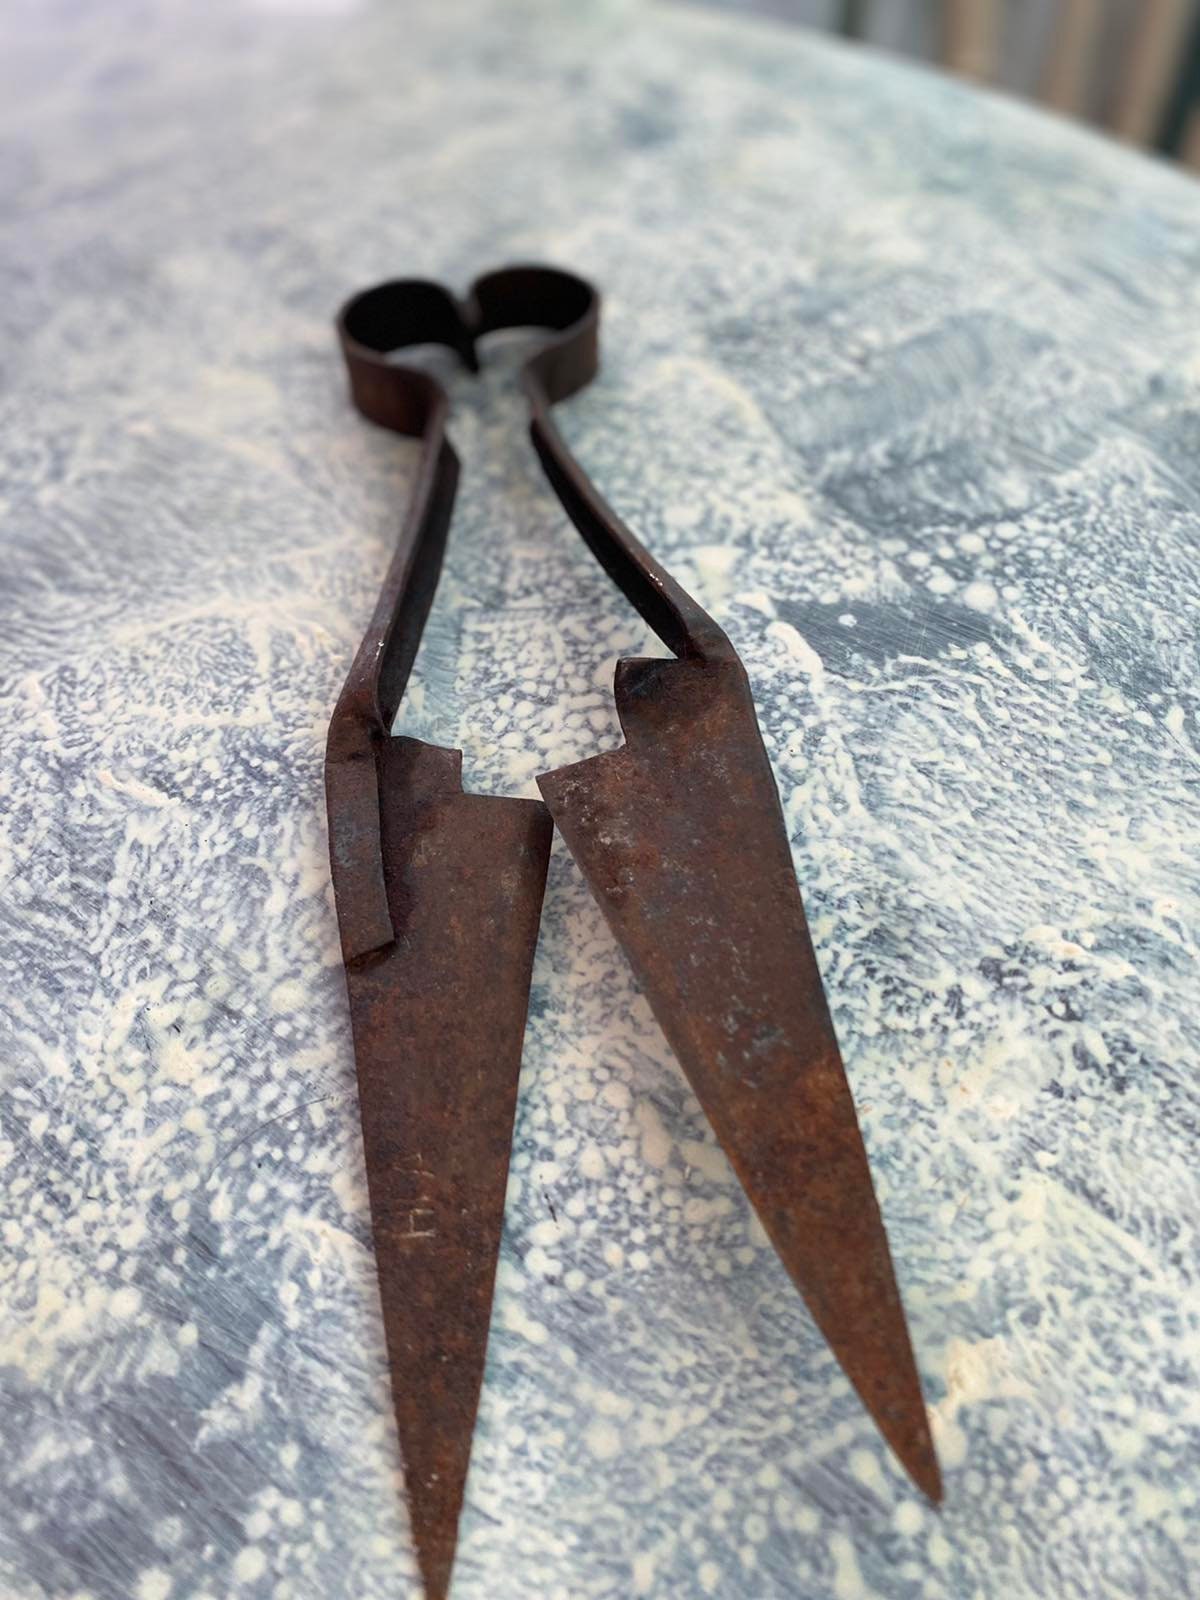 Vintage 1930s to 1950s Metal Sheep Shears Trimmers Rustic Farm Tool  Primitive Metal Display Country Home Decor Rusty Metal Farmhouse Decor 